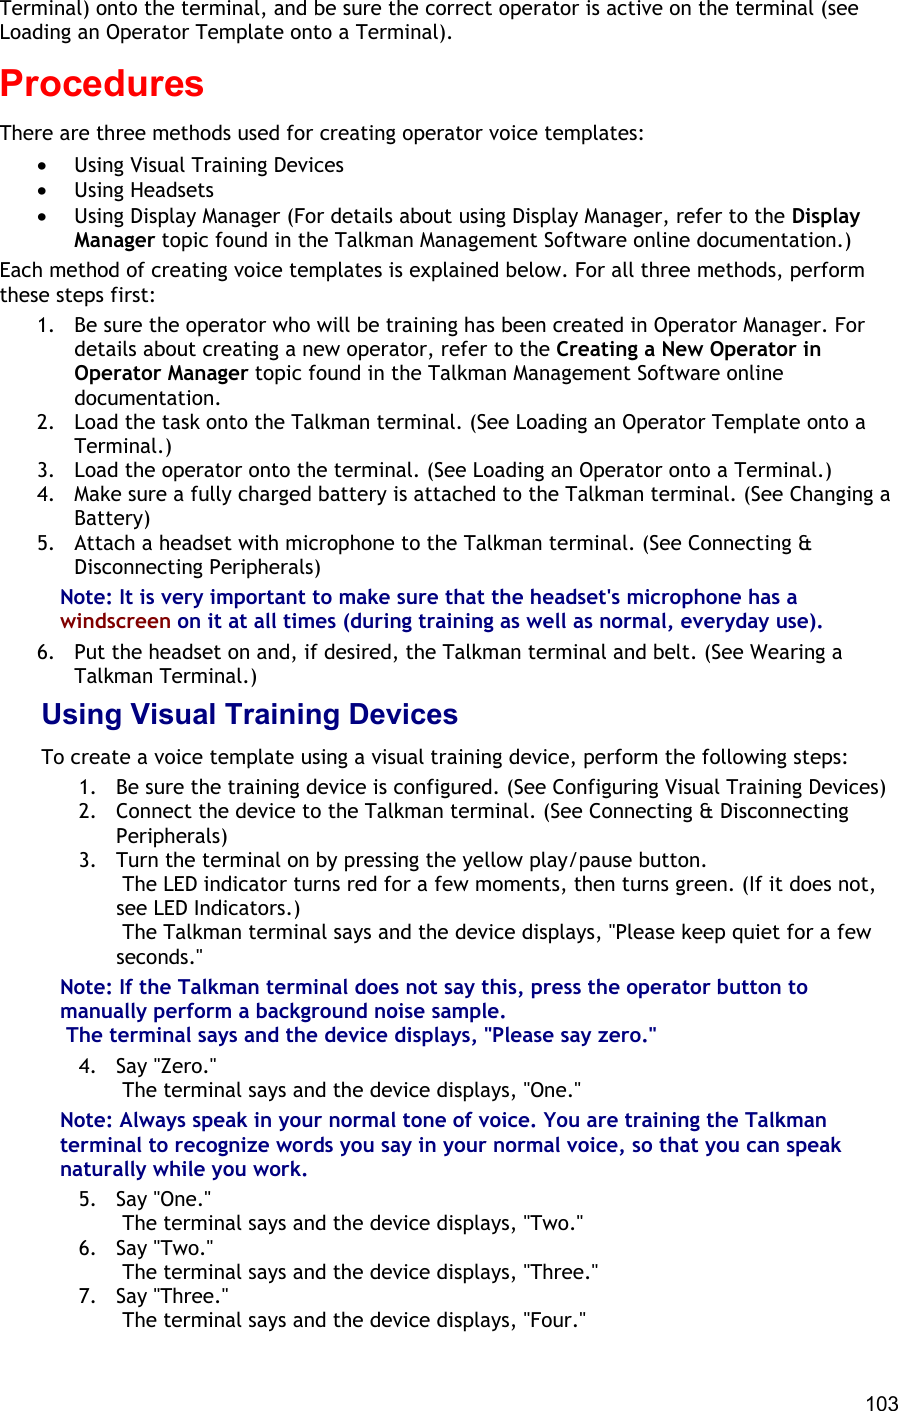  103 Terminal) onto the terminal, and be sure the correct operator is active on the terminal (see Loading an Operator Template onto a Terminal). Procedures There are three methods used for creating operator voice templates: •  Using Visual Training Devices •  Using Headsets •  Using Display Manager (For details about using Display Manager, refer to the Display Manager topic found in the Talkman Management Software online documentation.) Each method of creating voice templates is explained below. For all three methods, perform these steps first:  1.  Be sure the operator who will be training has been created in Operator Manager. For details about creating a new operator, refer to the Creating a New Operator in Operator Manager topic found in the Talkman Management Software online documentation. 2.  Load the task onto the Talkman terminal. (See Loading an Operator Template onto a Terminal.) 3.  Load the operator onto the terminal. (See Loading an Operator onto a Terminal.) 4.  Make sure a fully charged battery is attached to the Talkman terminal. (See Changing a Battery) 5.  Attach a headset with microphone to the Talkman terminal. (See Connecting &amp; Disconnecting Peripherals) Note: It is very important to make sure that the headset&apos;s microphone has a windscreen on it at all times (during training as well as normal, everyday use). 6.  Put the headset on and, if desired, the Talkman terminal and belt. (See Wearing a Talkman Terminal.) Using Visual Training Devices To create a voice template using a visual training device, perform the following steps: 1.  Be sure the training device is configured. (See Configuring Visual Training Devices) 2.  Connect the device to the Talkman terminal. (See Connecting &amp; Disconnecting Peripherals) 3.  Turn the terminal on by pressing the yellow play/pause button.  The LED indicator turns red for a few moments, then turns green. (If it does not, see LED Indicators.)  The Talkman terminal says and the device displays, &quot;Please keep quiet for a few seconds.&quot; Note: If the Talkman terminal does not say this, press the operator button to manually perform a background noise sample.  The terminal says and the device displays, &quot;Please say zero.&quot; 4. Say &quot;Zero.&quot;  The terminal says and the device displays, &quot;One.&quot; Note: Always speak in your normal tone of voice. You are training the Talkman terminal to recognize words you say in your normal voice, so that you can speak naturally while you work. 5. Say &quot;One.&quot;  The terminal says and the device displays, &quot;Two.&quot; 6. Say &quot;Two.&quot;  The terminal says and the device displays, &quot;Three.&quot; 7. Say &quot;Three.&quot;  The terminal says and the device displays, &quot;Four.&quot; 